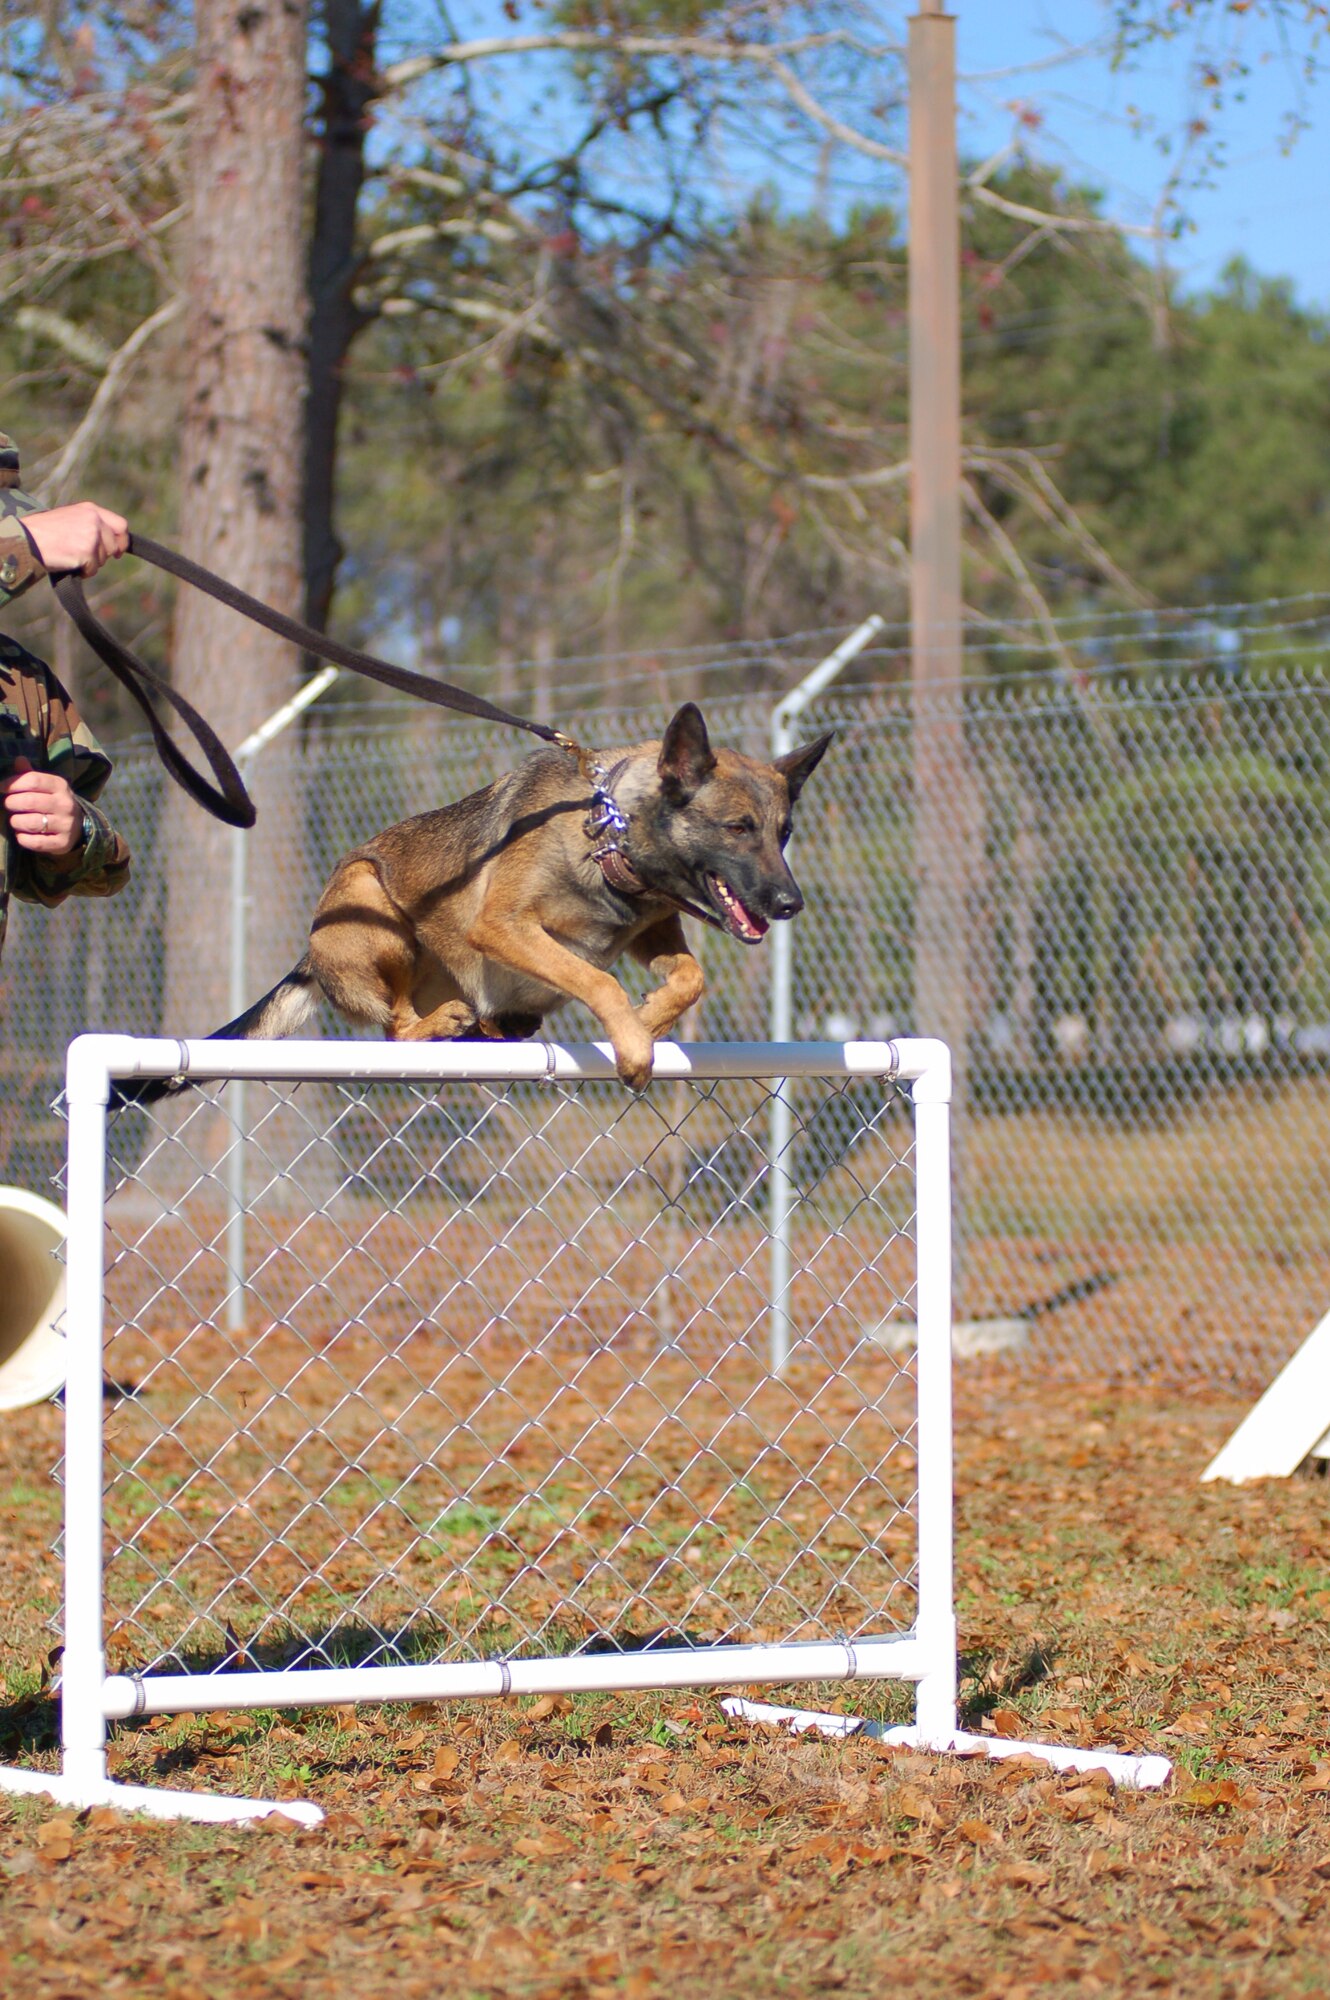 Ffifteen, a military working dog assigned to the 824th Security Forces Squadron, Moody AFB, Ga., clears a chain link fence obstacle during agility training here Dec. 28, 2006. Staff Sgt. James Parkis and is assigned as Fifiteen's miltary working dog handler. (U.S. Air Force photo by Tech Sgt. Parker Gyokeres)  Staff Sgt. James Parkis and his 